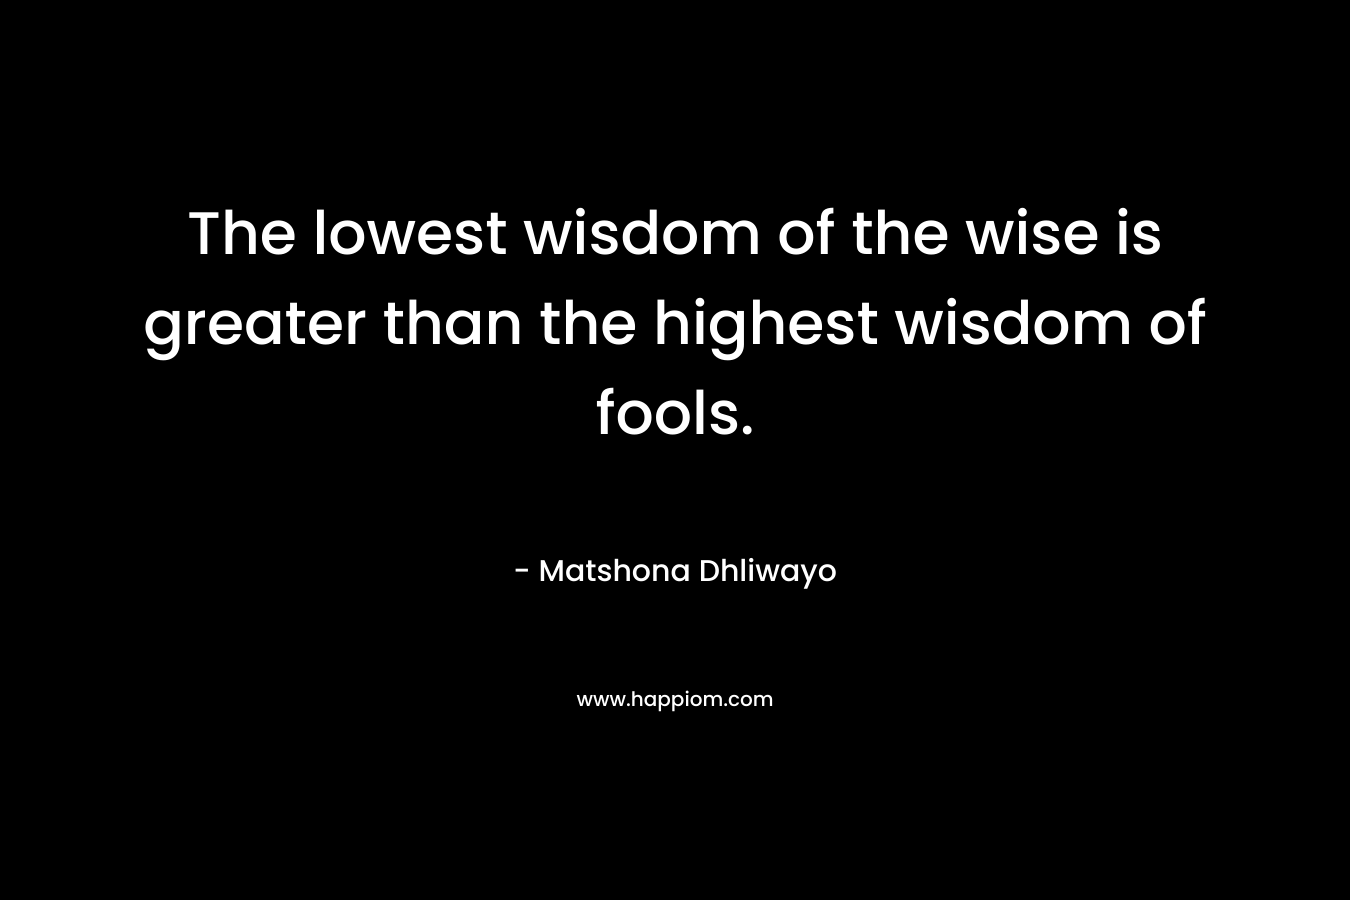 The lowest wisdom of the wise is greater than the highest wisdom of fools. – Matshona Dhliwayo